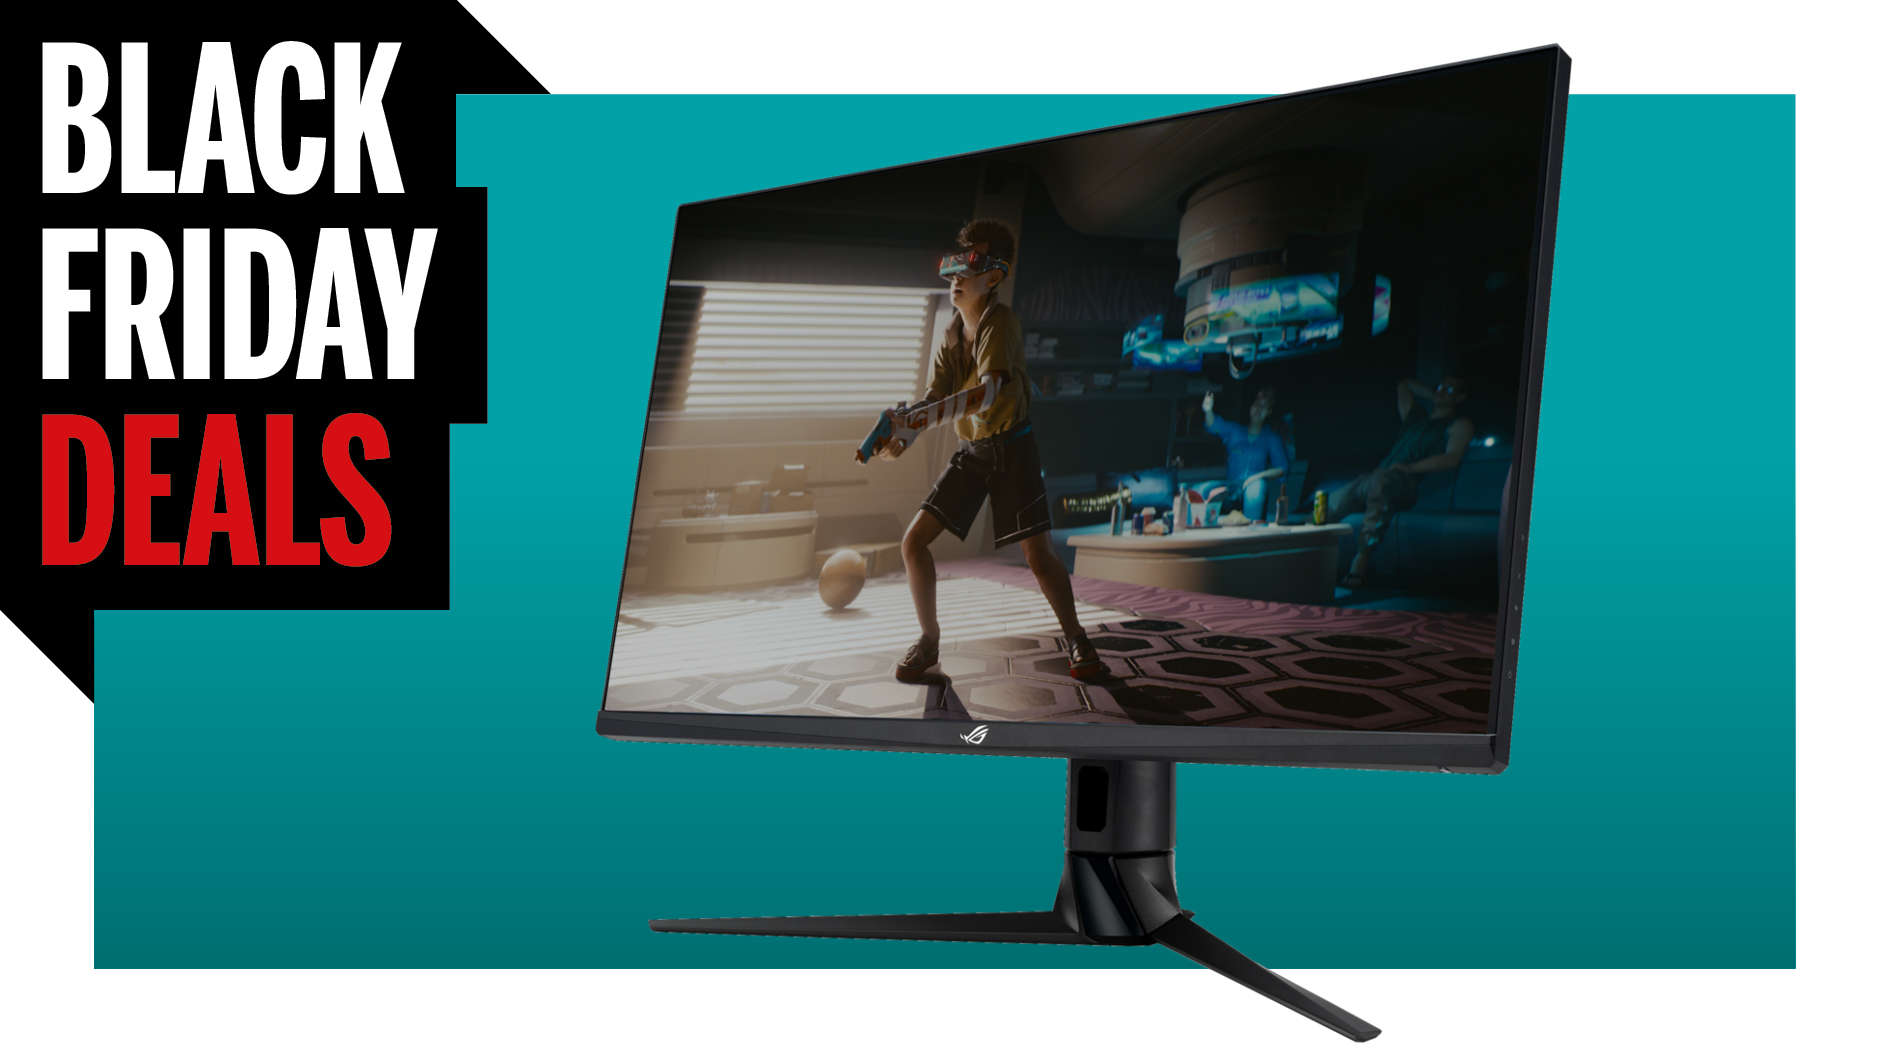 Black Friday Gaming Monitor Deals 2021: The Best And Brightest Screens At Great Prices thumbnail